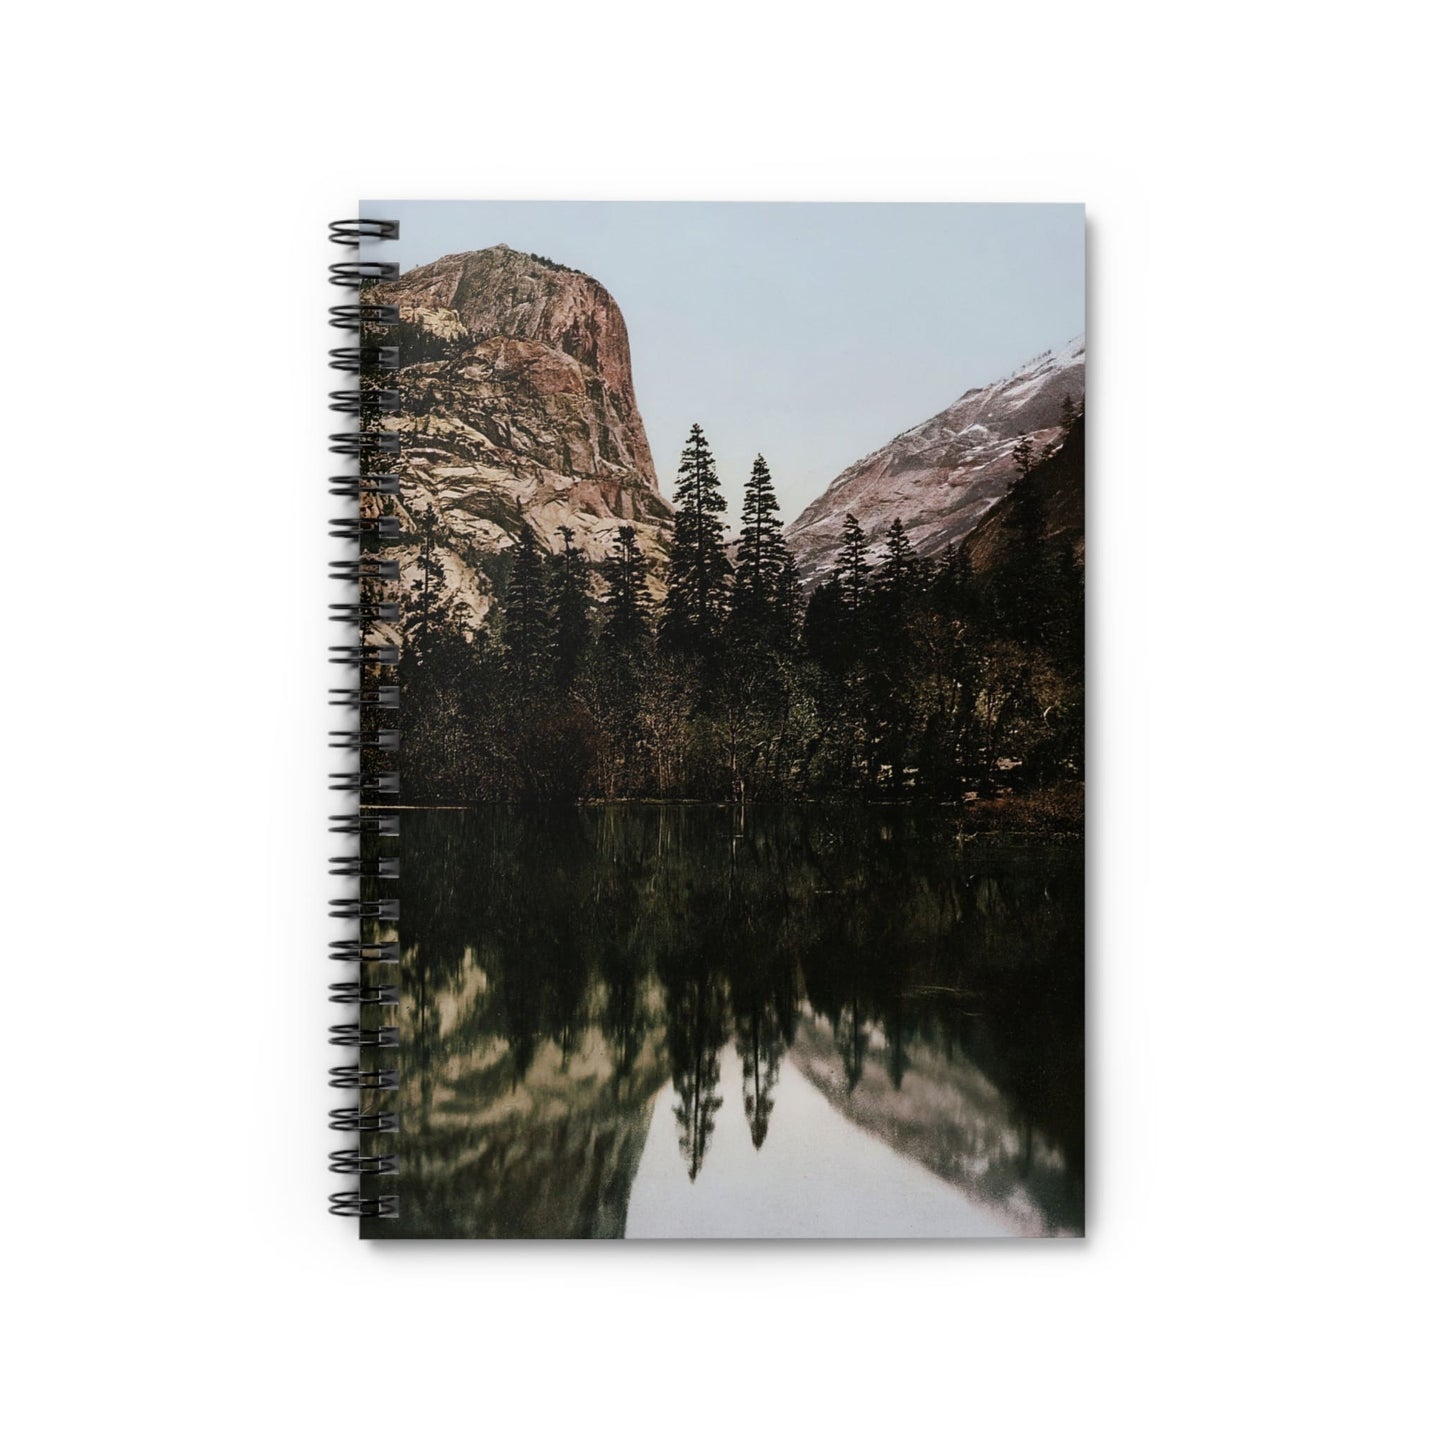 Yosemite National Park Notebook with Mirror Lake cover, ideal for journaling and planning, showcasing Mirror Lake in Yosemite.